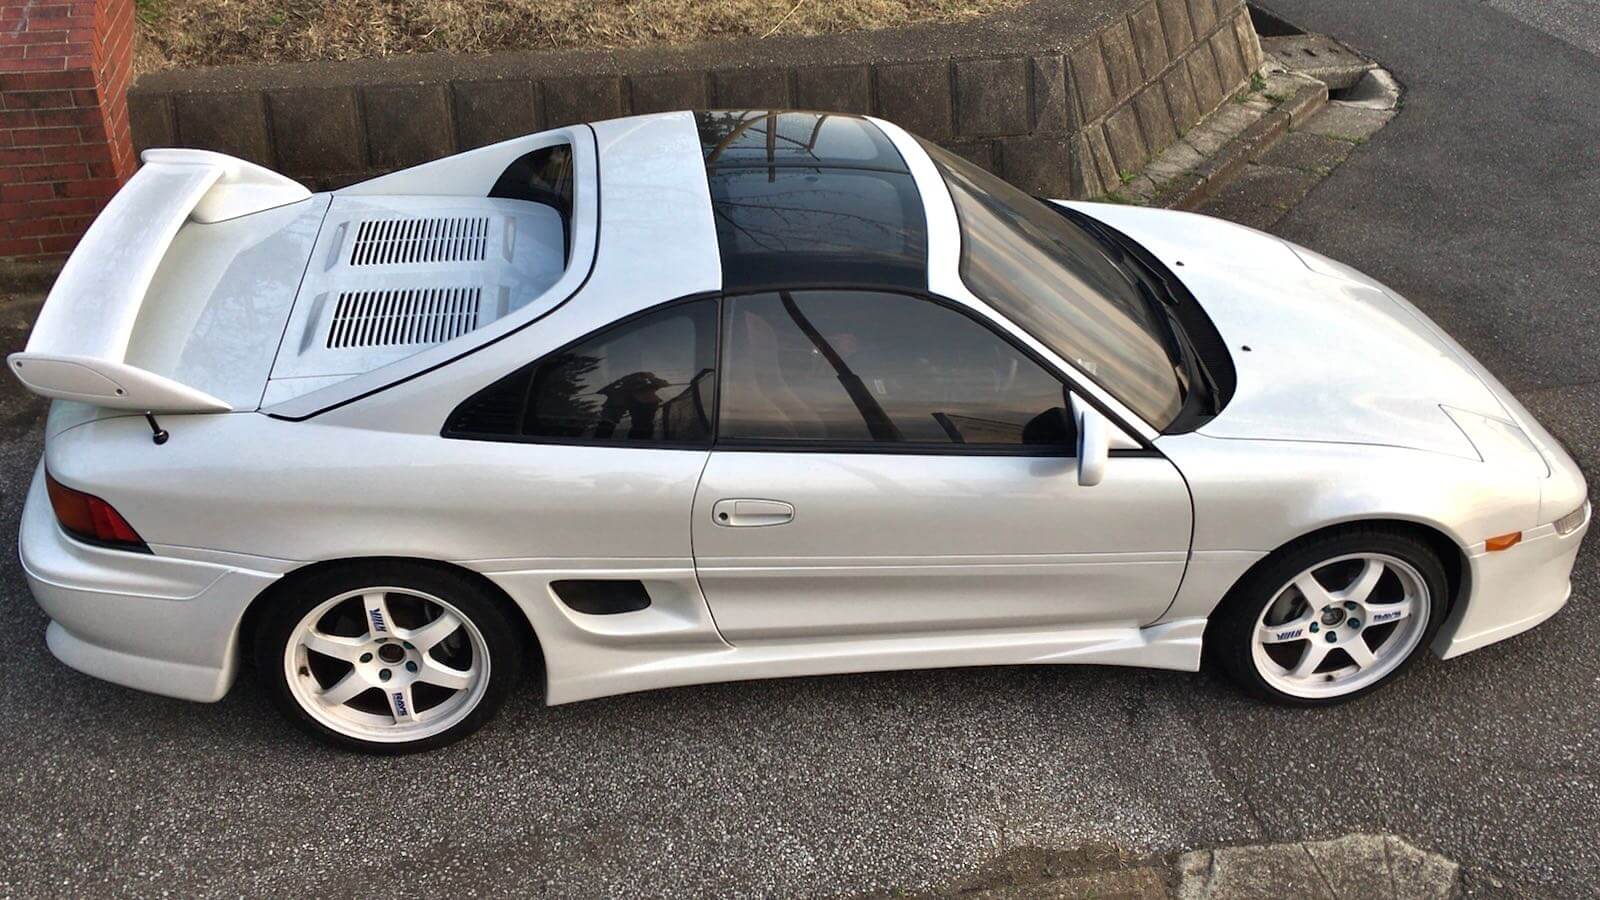 MR2 seen from diagonally above